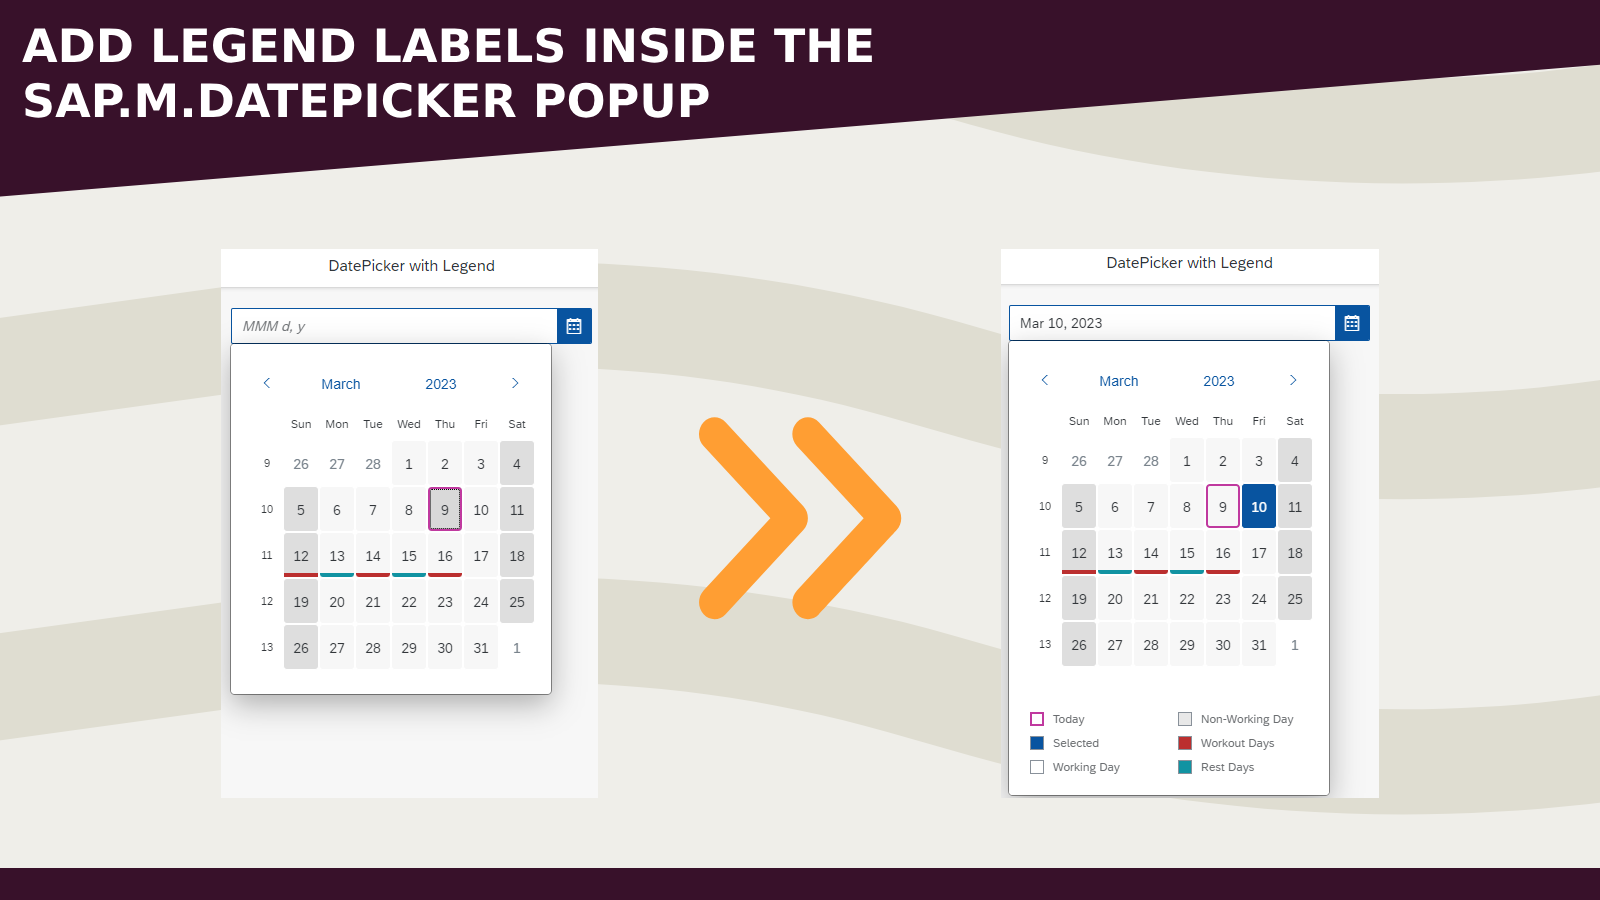 How to add legend labels inside the DatePicker popup